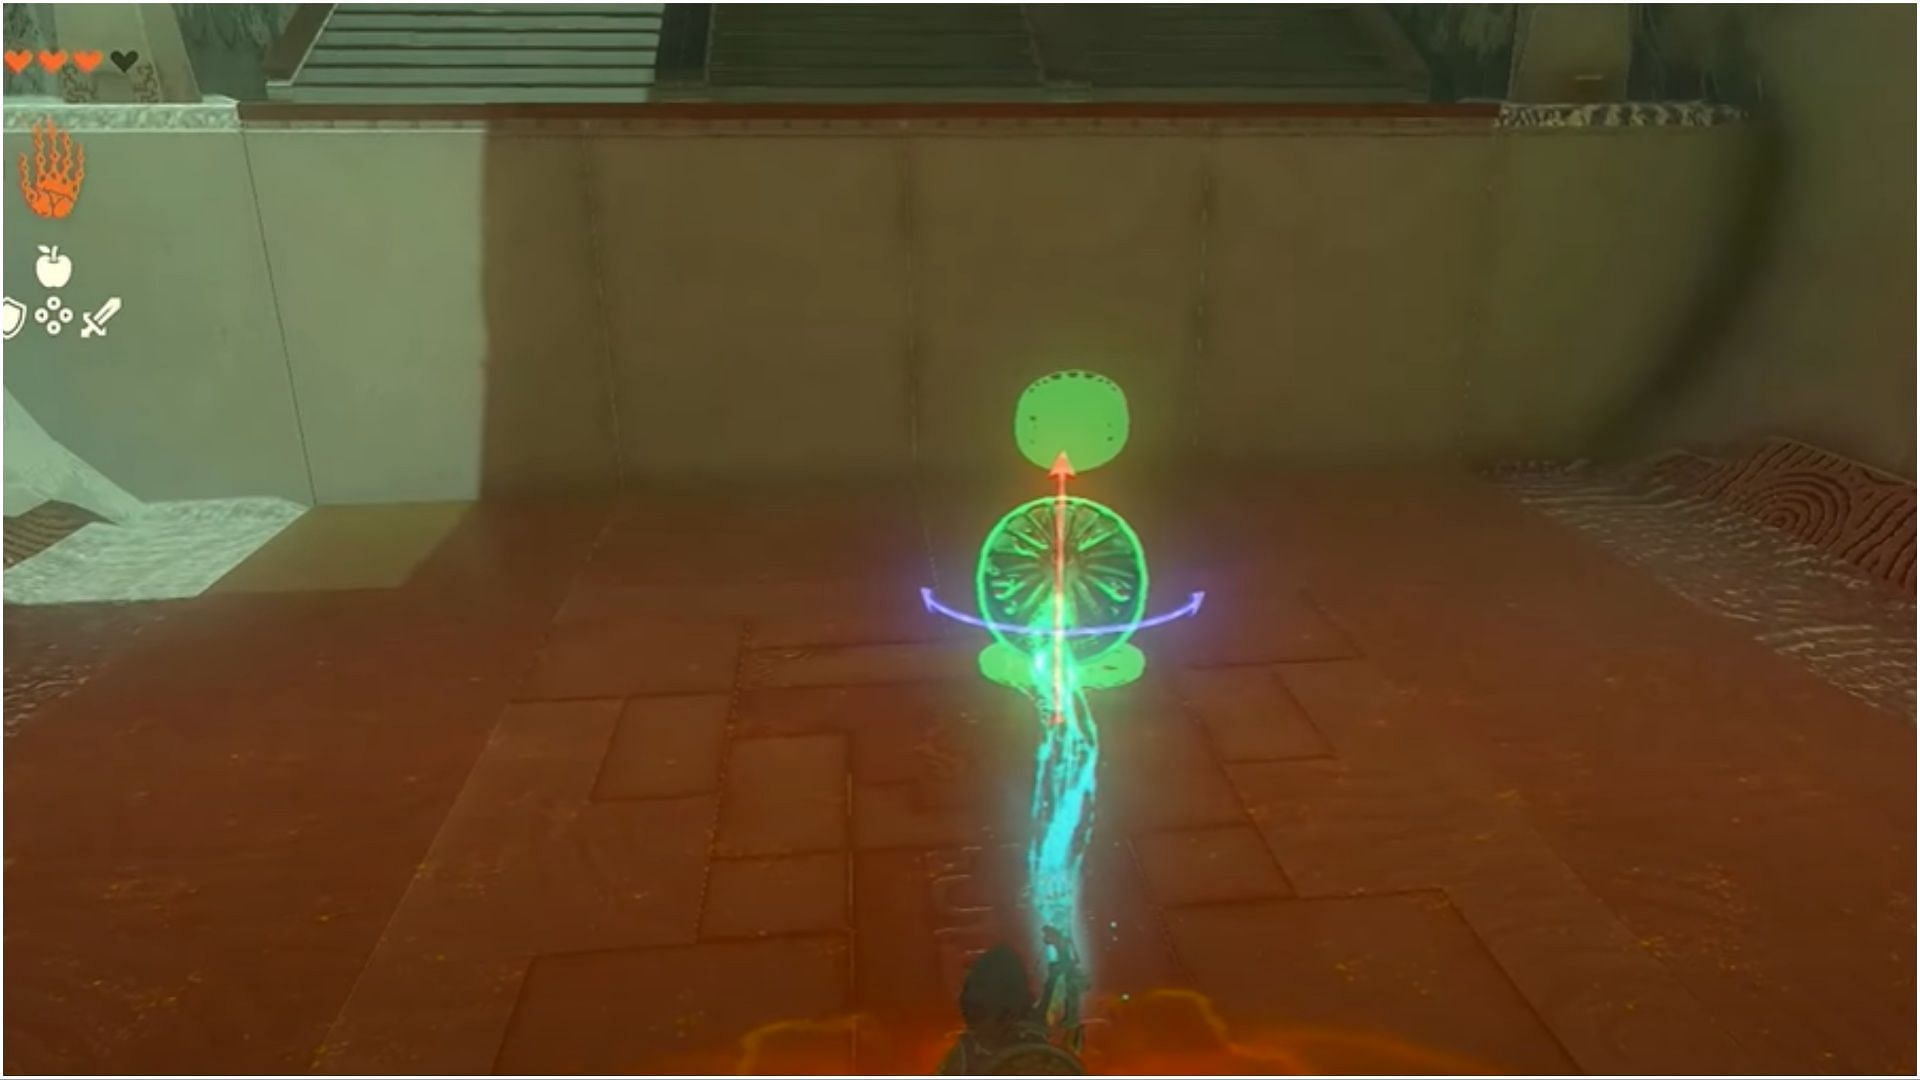 This Shrine requires players to cleverly employ the Ultrahand ability (Image via The Legend of Zelda Tears of the Kingdom)